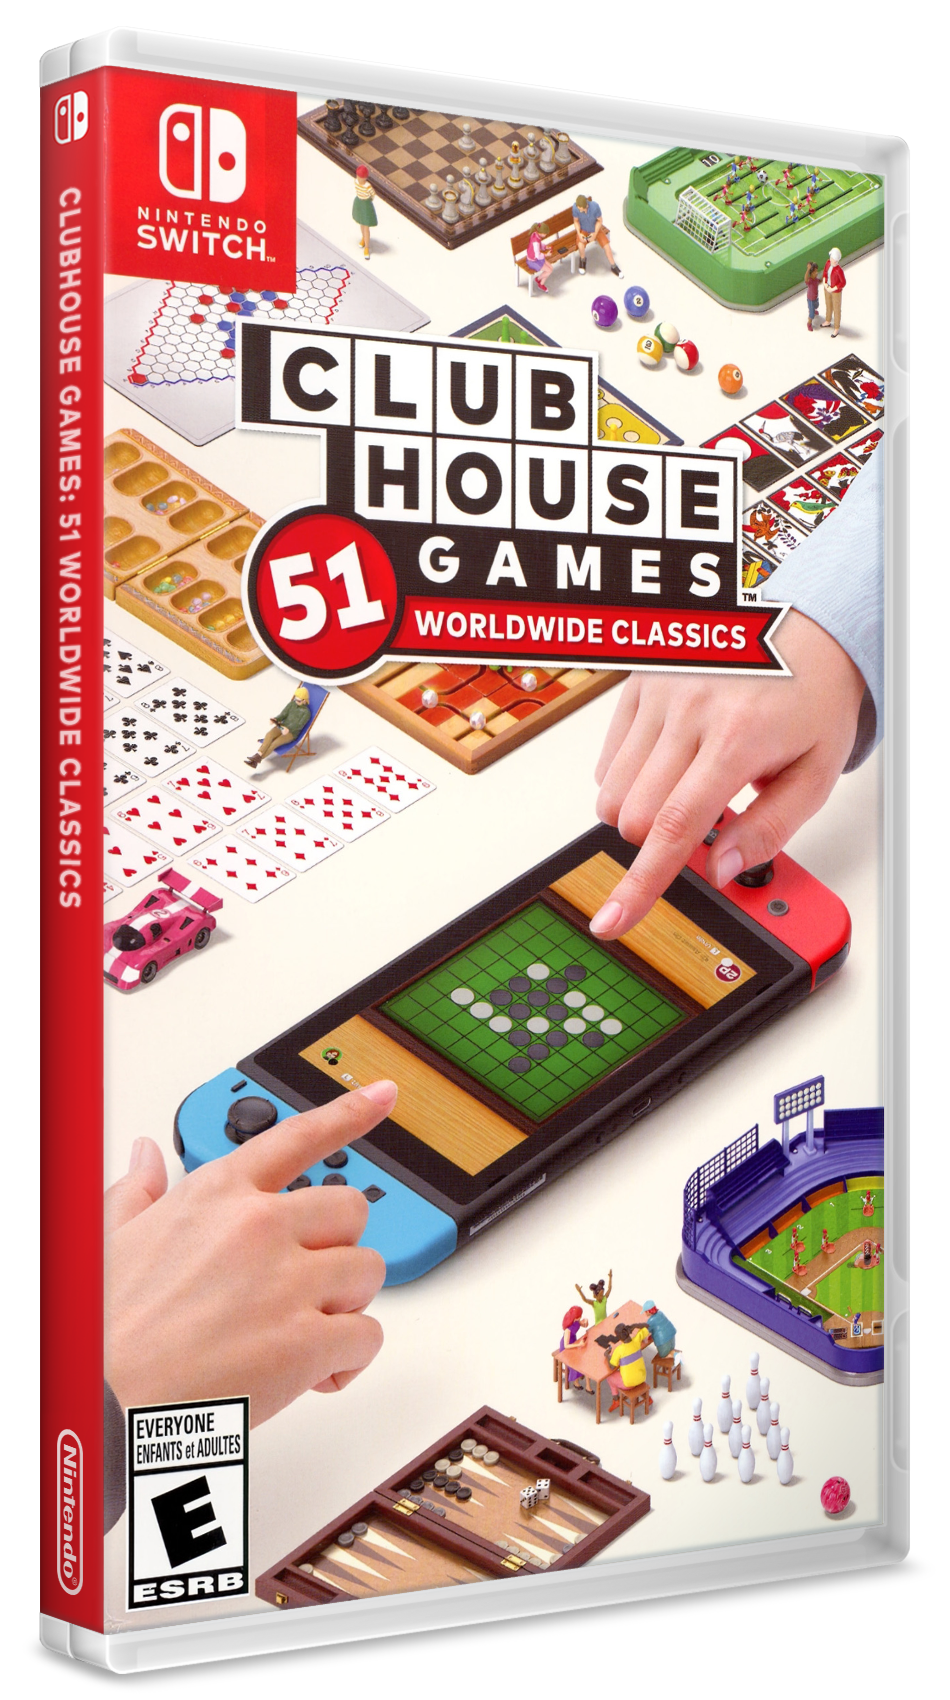 Clubhouse Games Images - LaunchBox Games Database